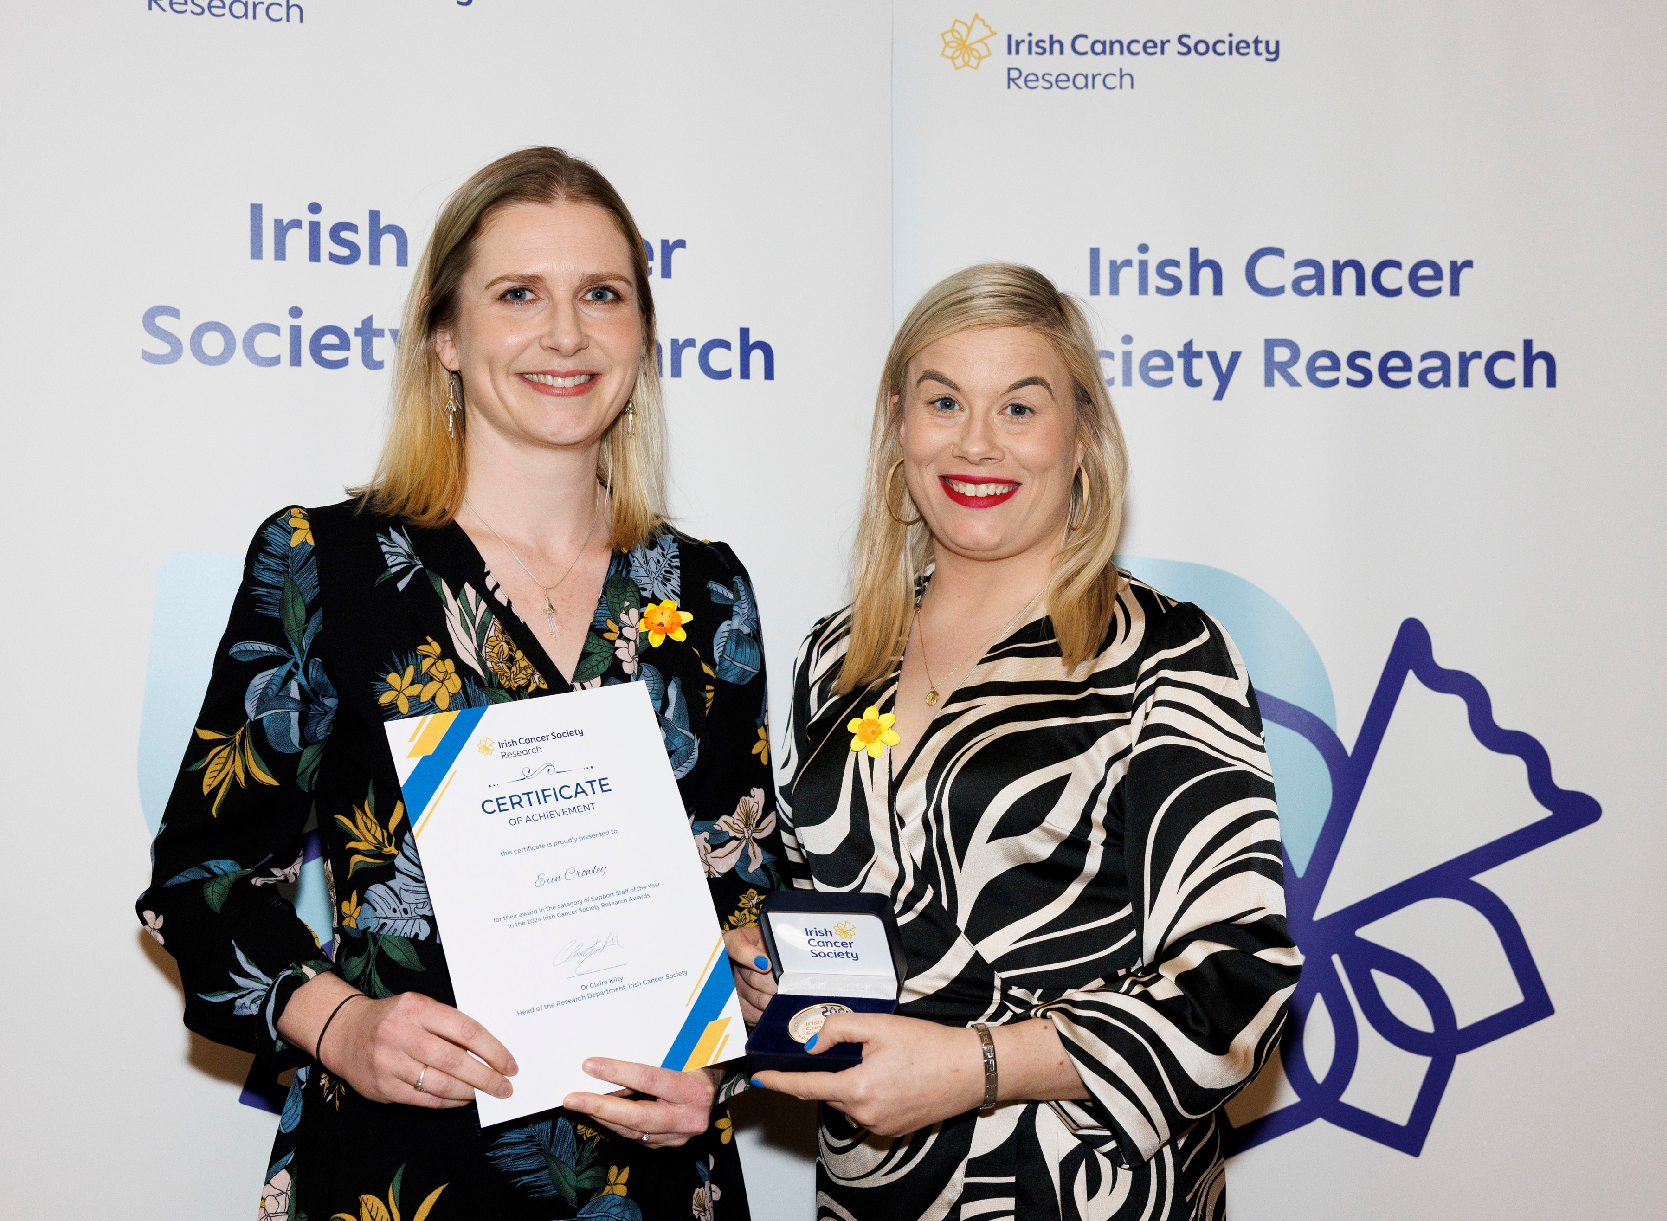 Dr Erin Crowley, Cancer Research @UCC and Dr Claire Kilty, Irish Cancer Society Head of Research